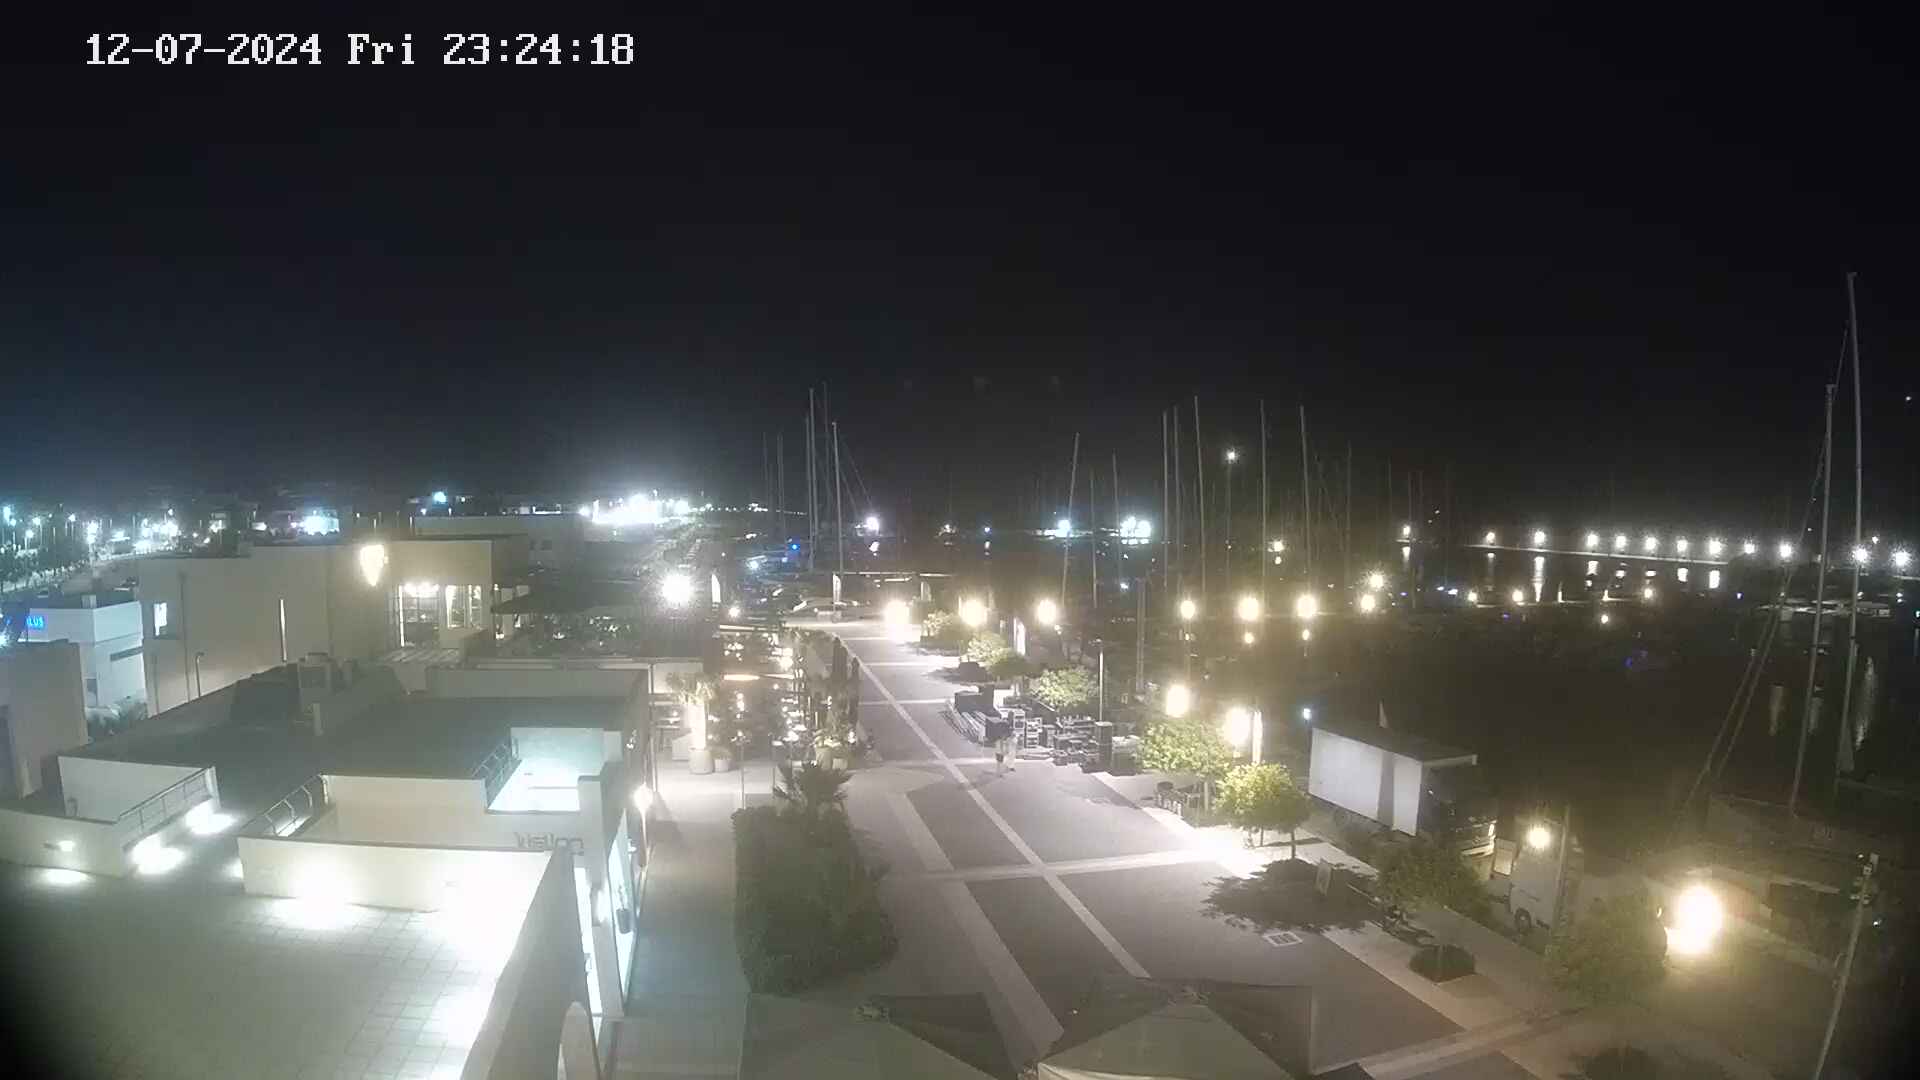 Rhodos Stadt Mo. 23:26